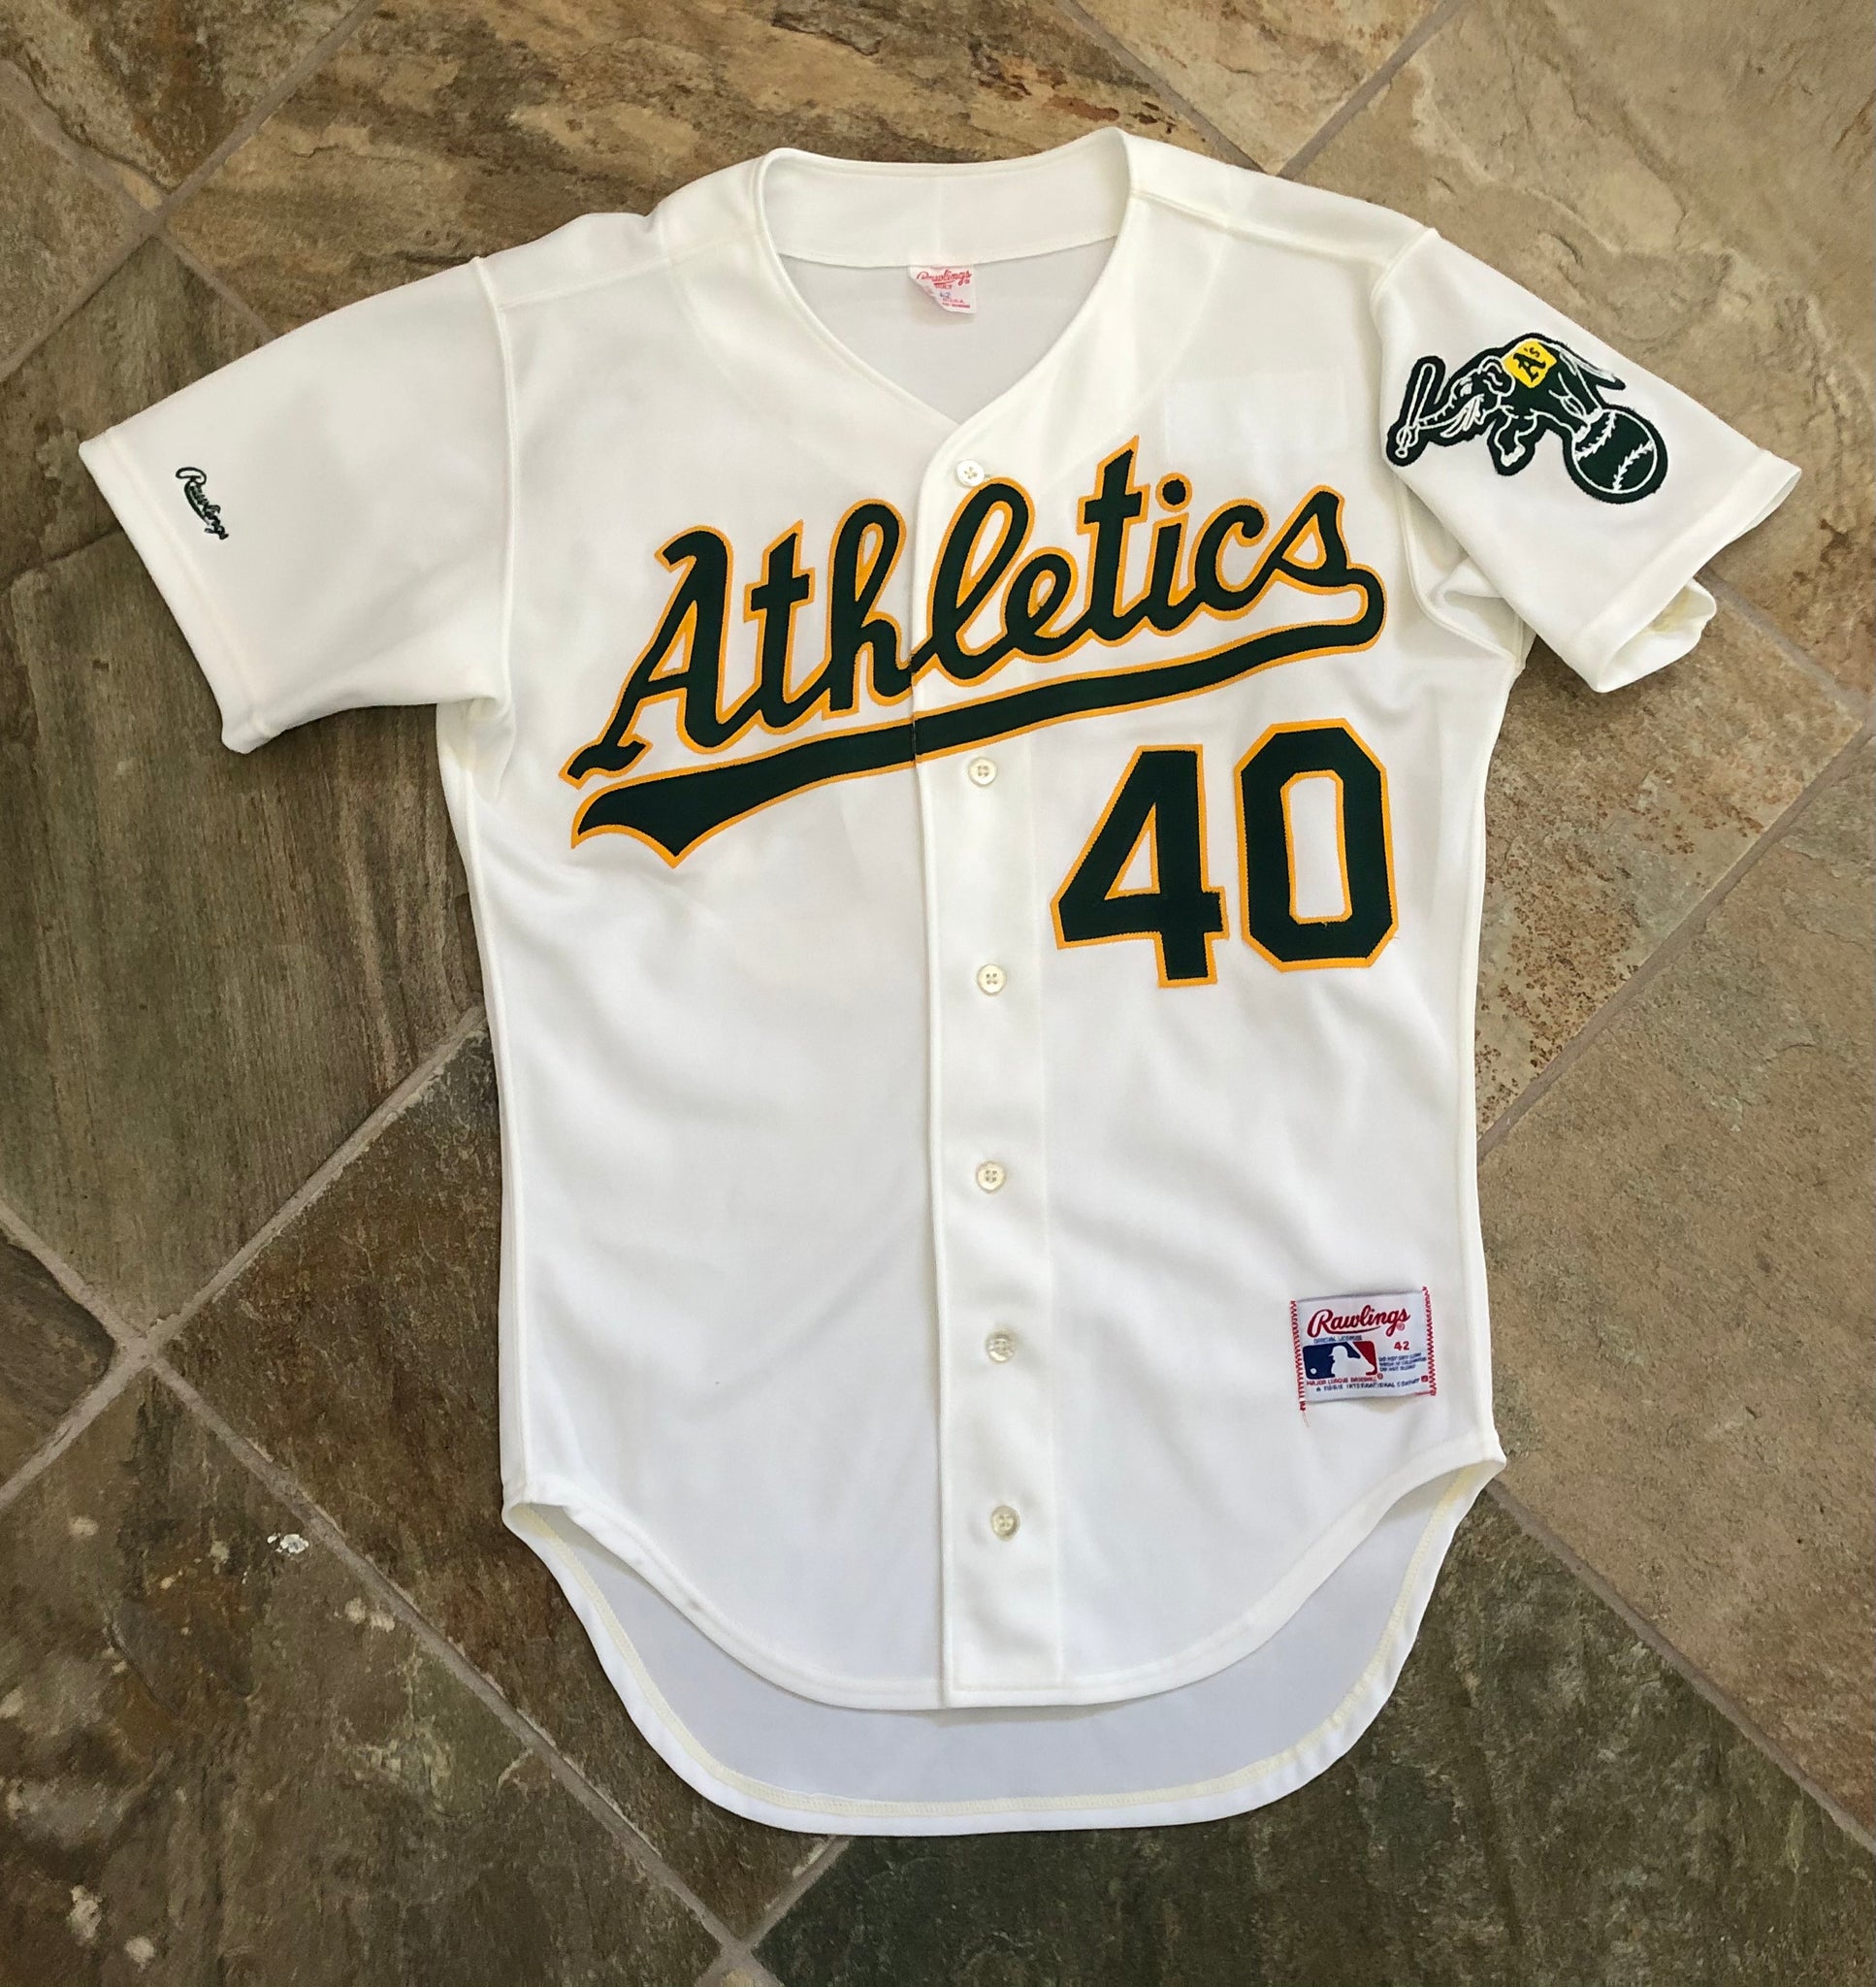 Vintage Authentic 80s Oakland Athletics A's Jersey by Rawlings Size 50  Sewn